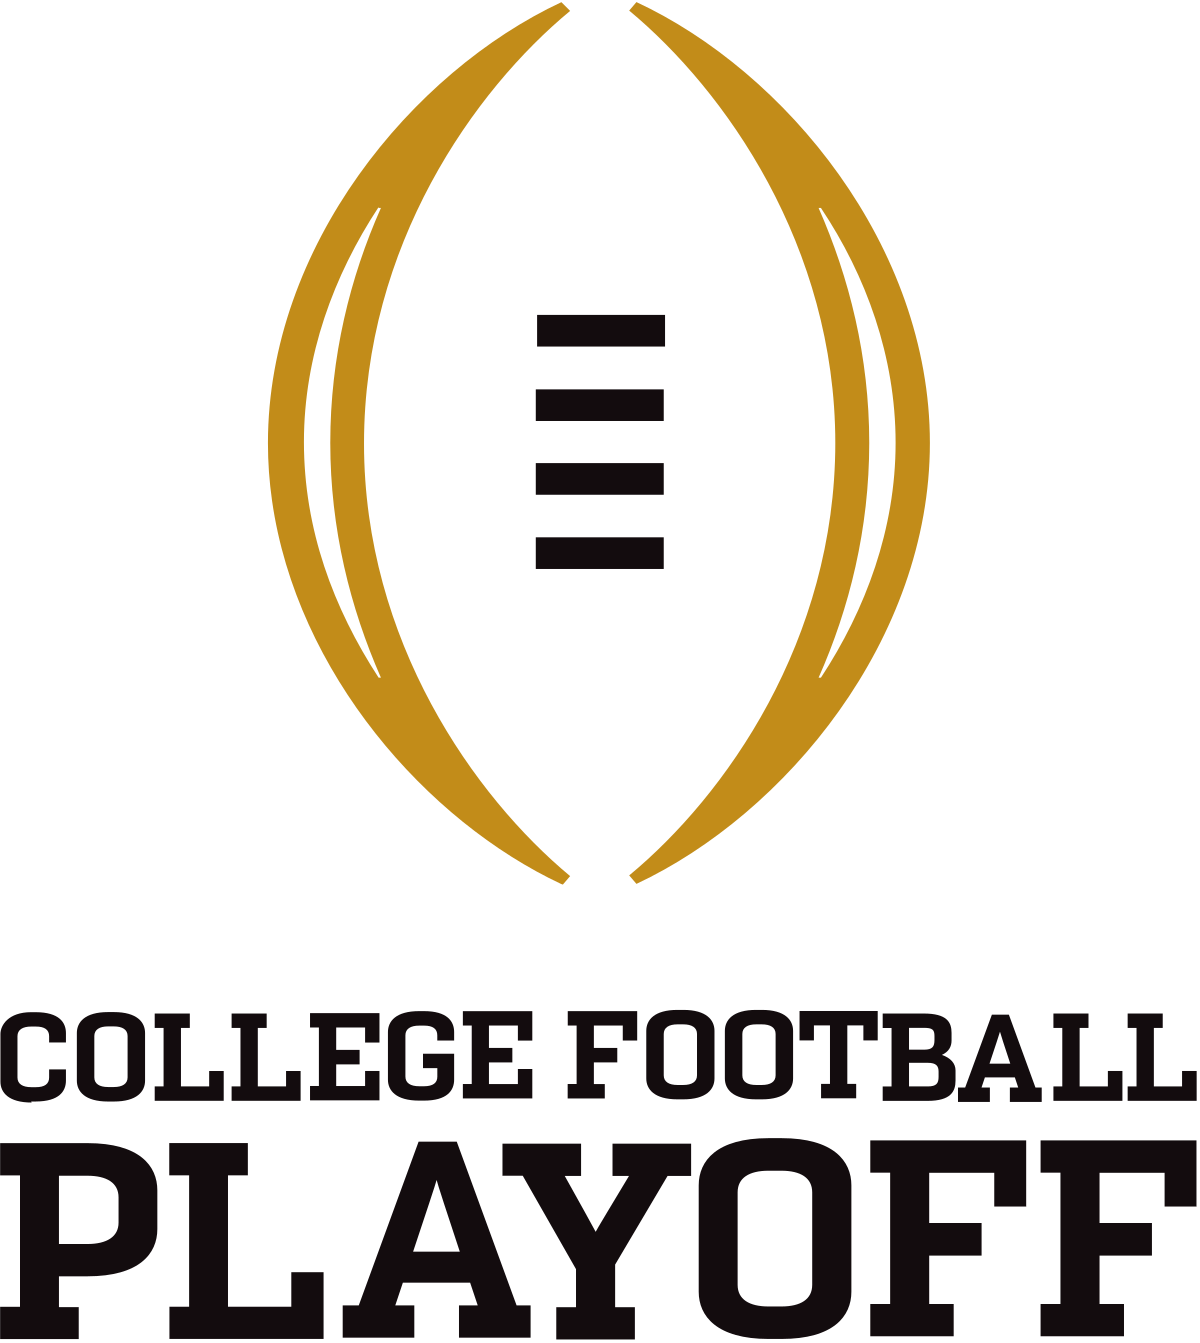 College Football Playoff-- Confirmed for 2-years 5+7 format - G&J thoughts on it